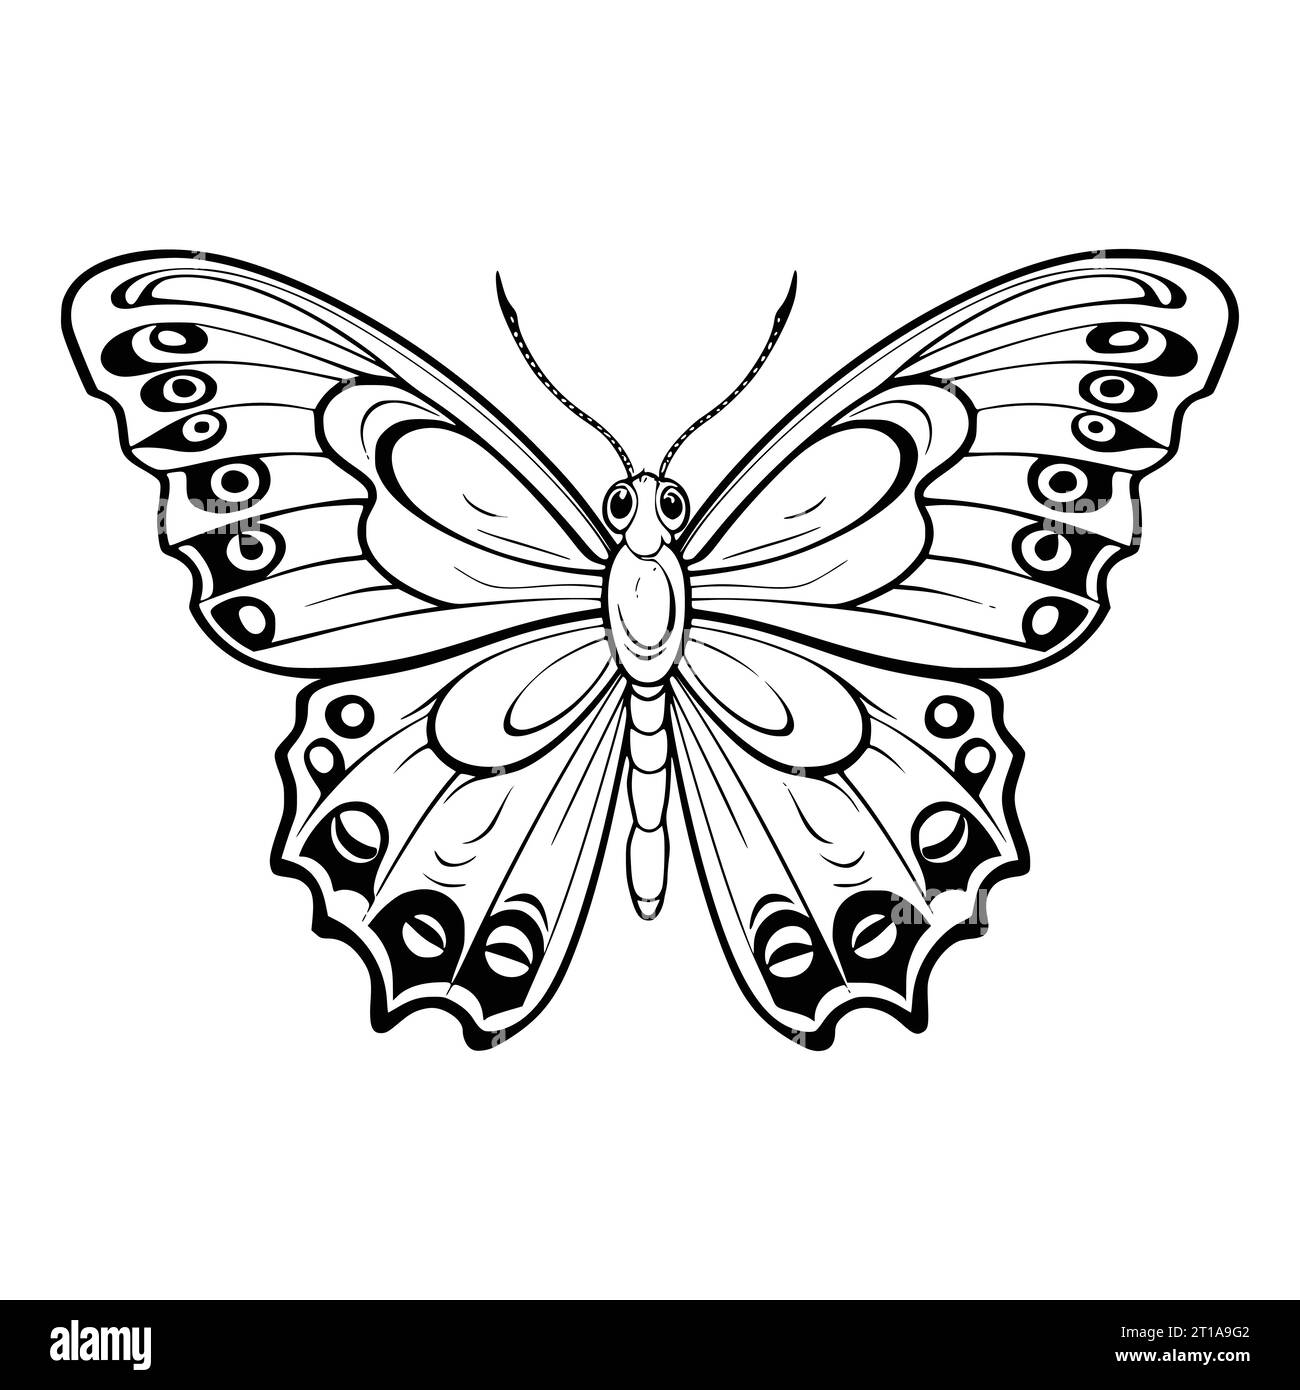 Butterfly Coloring Page for Kids Stock Vector